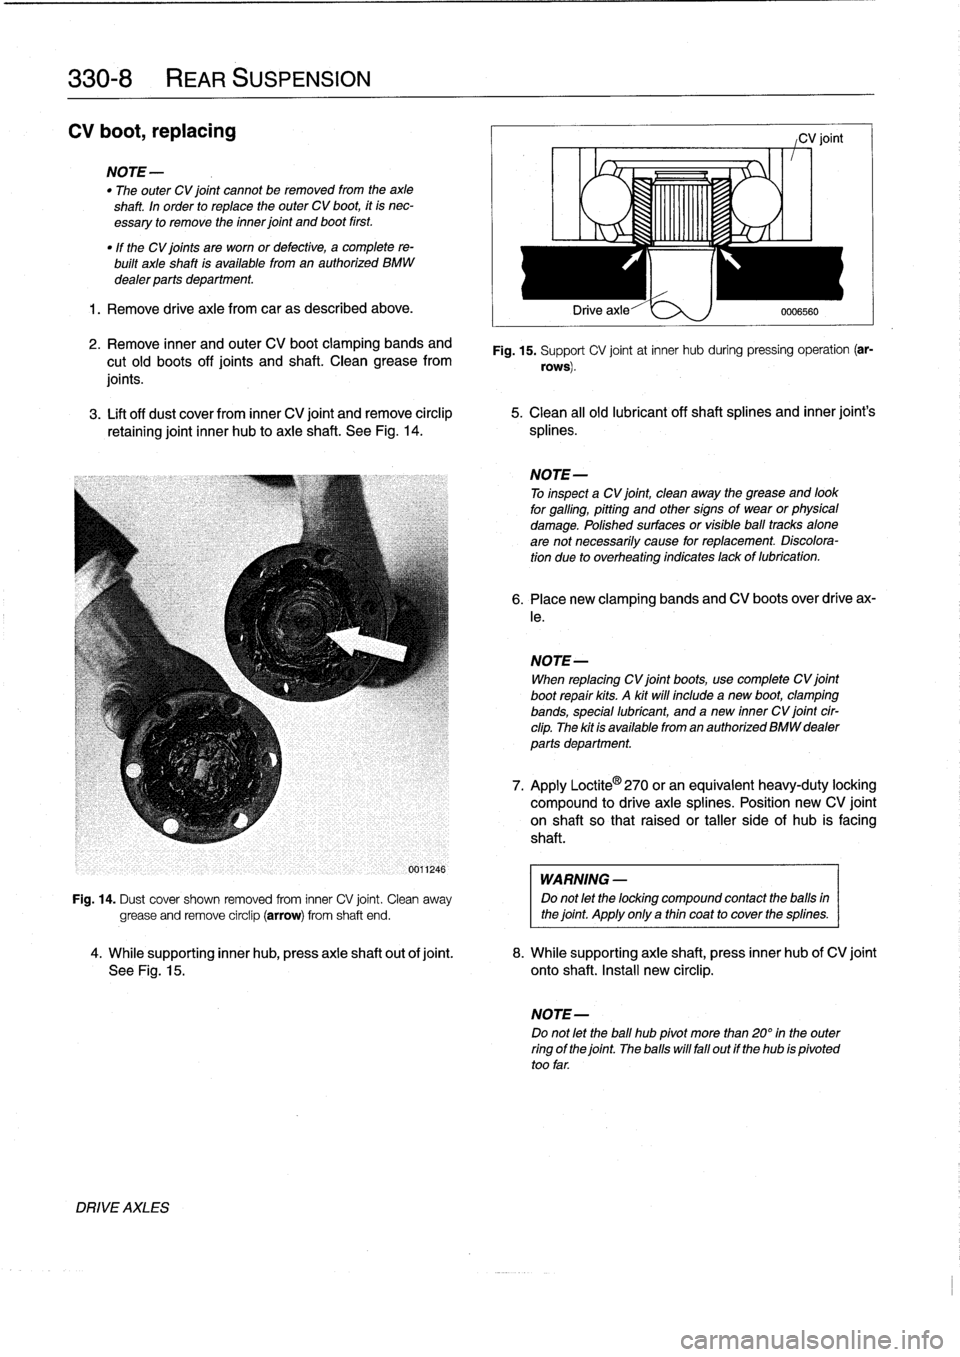 BMW 318i 1997 E36 Service Manual 
330-
8

	

REAR
SUSPENSION

CV
boot,
replacing

NOTE-

"
The
outer
CV
joint
cannot
be
removed
from
the
axle
shaft
.
In
order
to
replace
the
outer
CV
boot,
it
is
nec-
essary
to
remove
the
inner
joint
